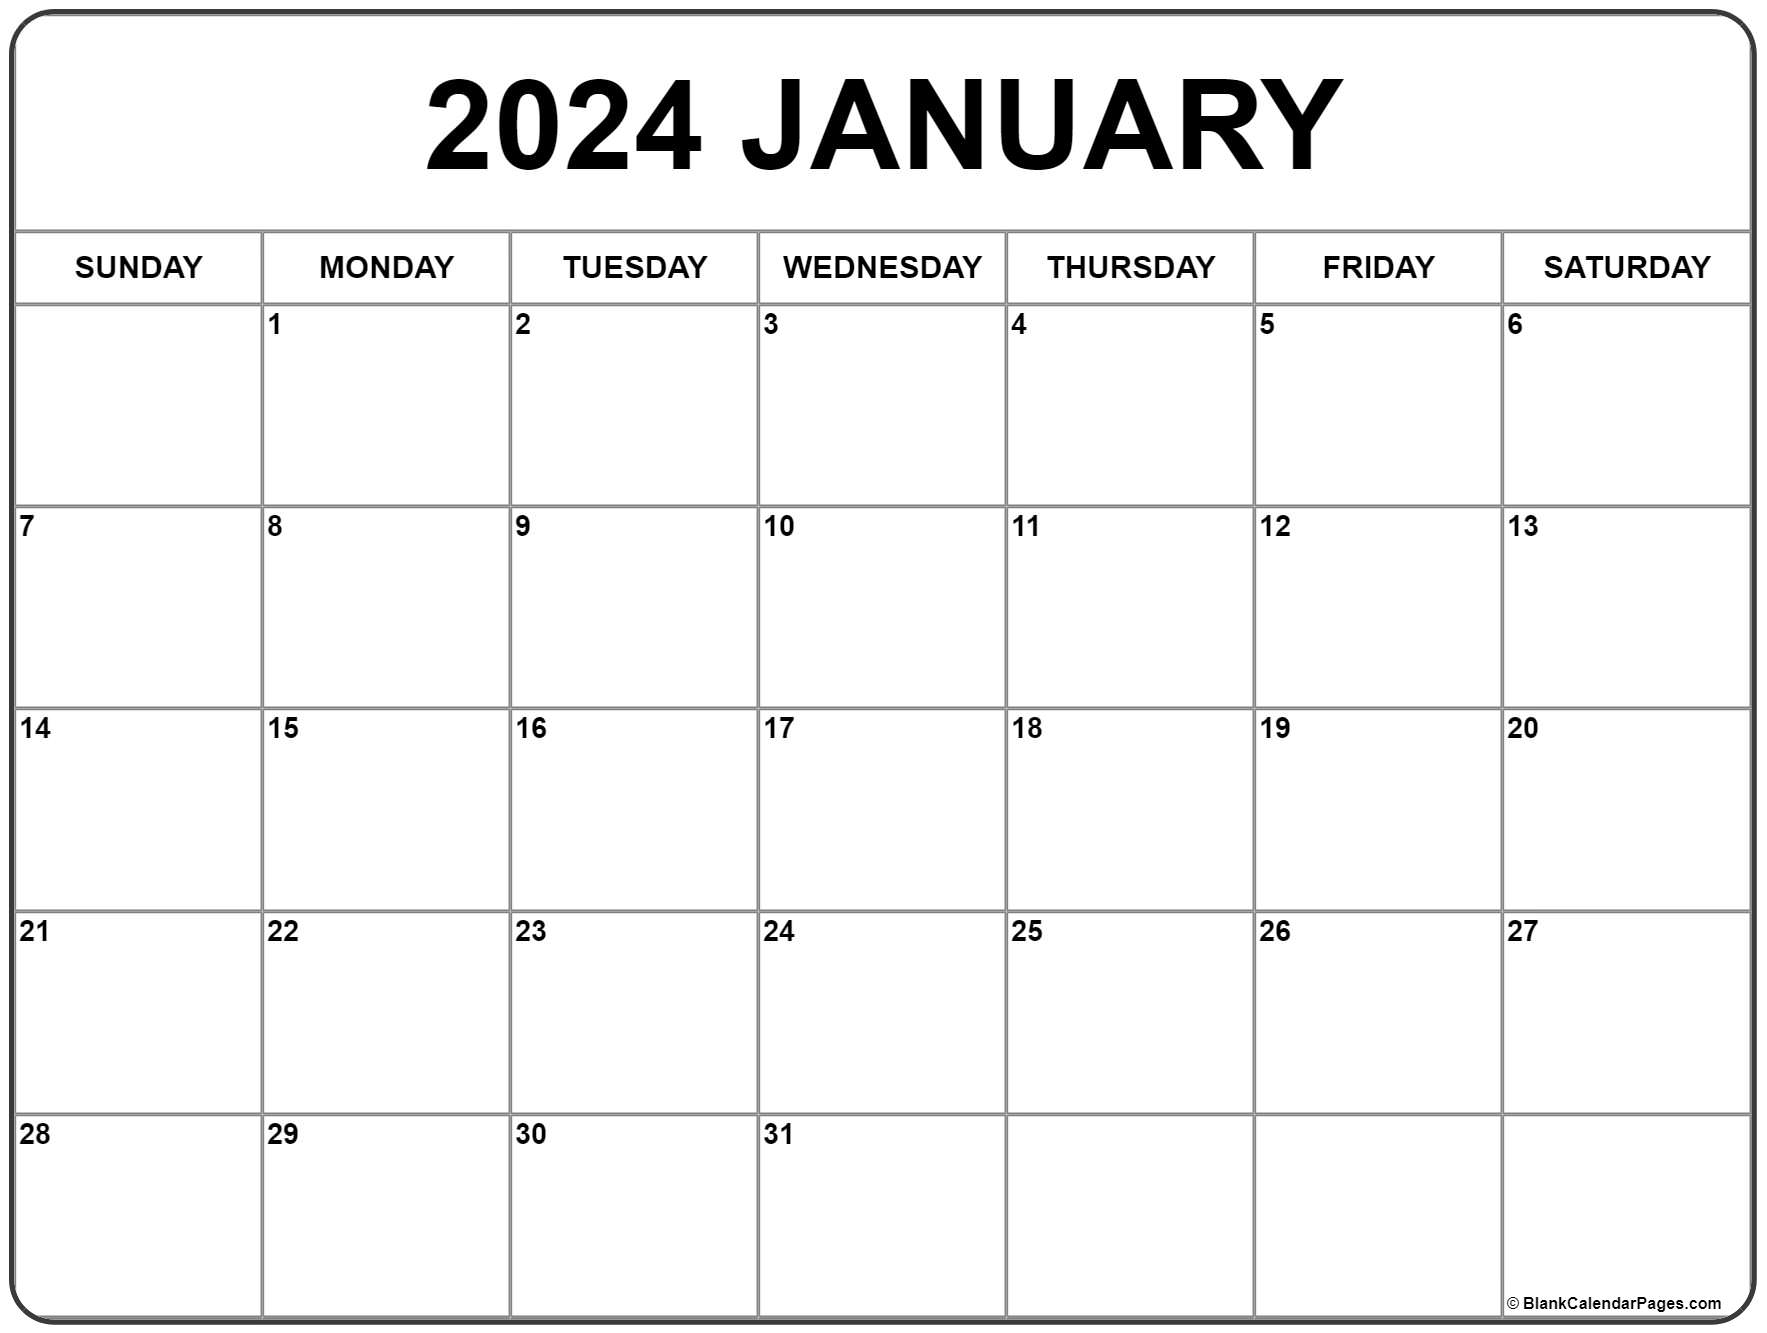 2024 January Calendar Page Pictures To Print Jan 2024 Calendar